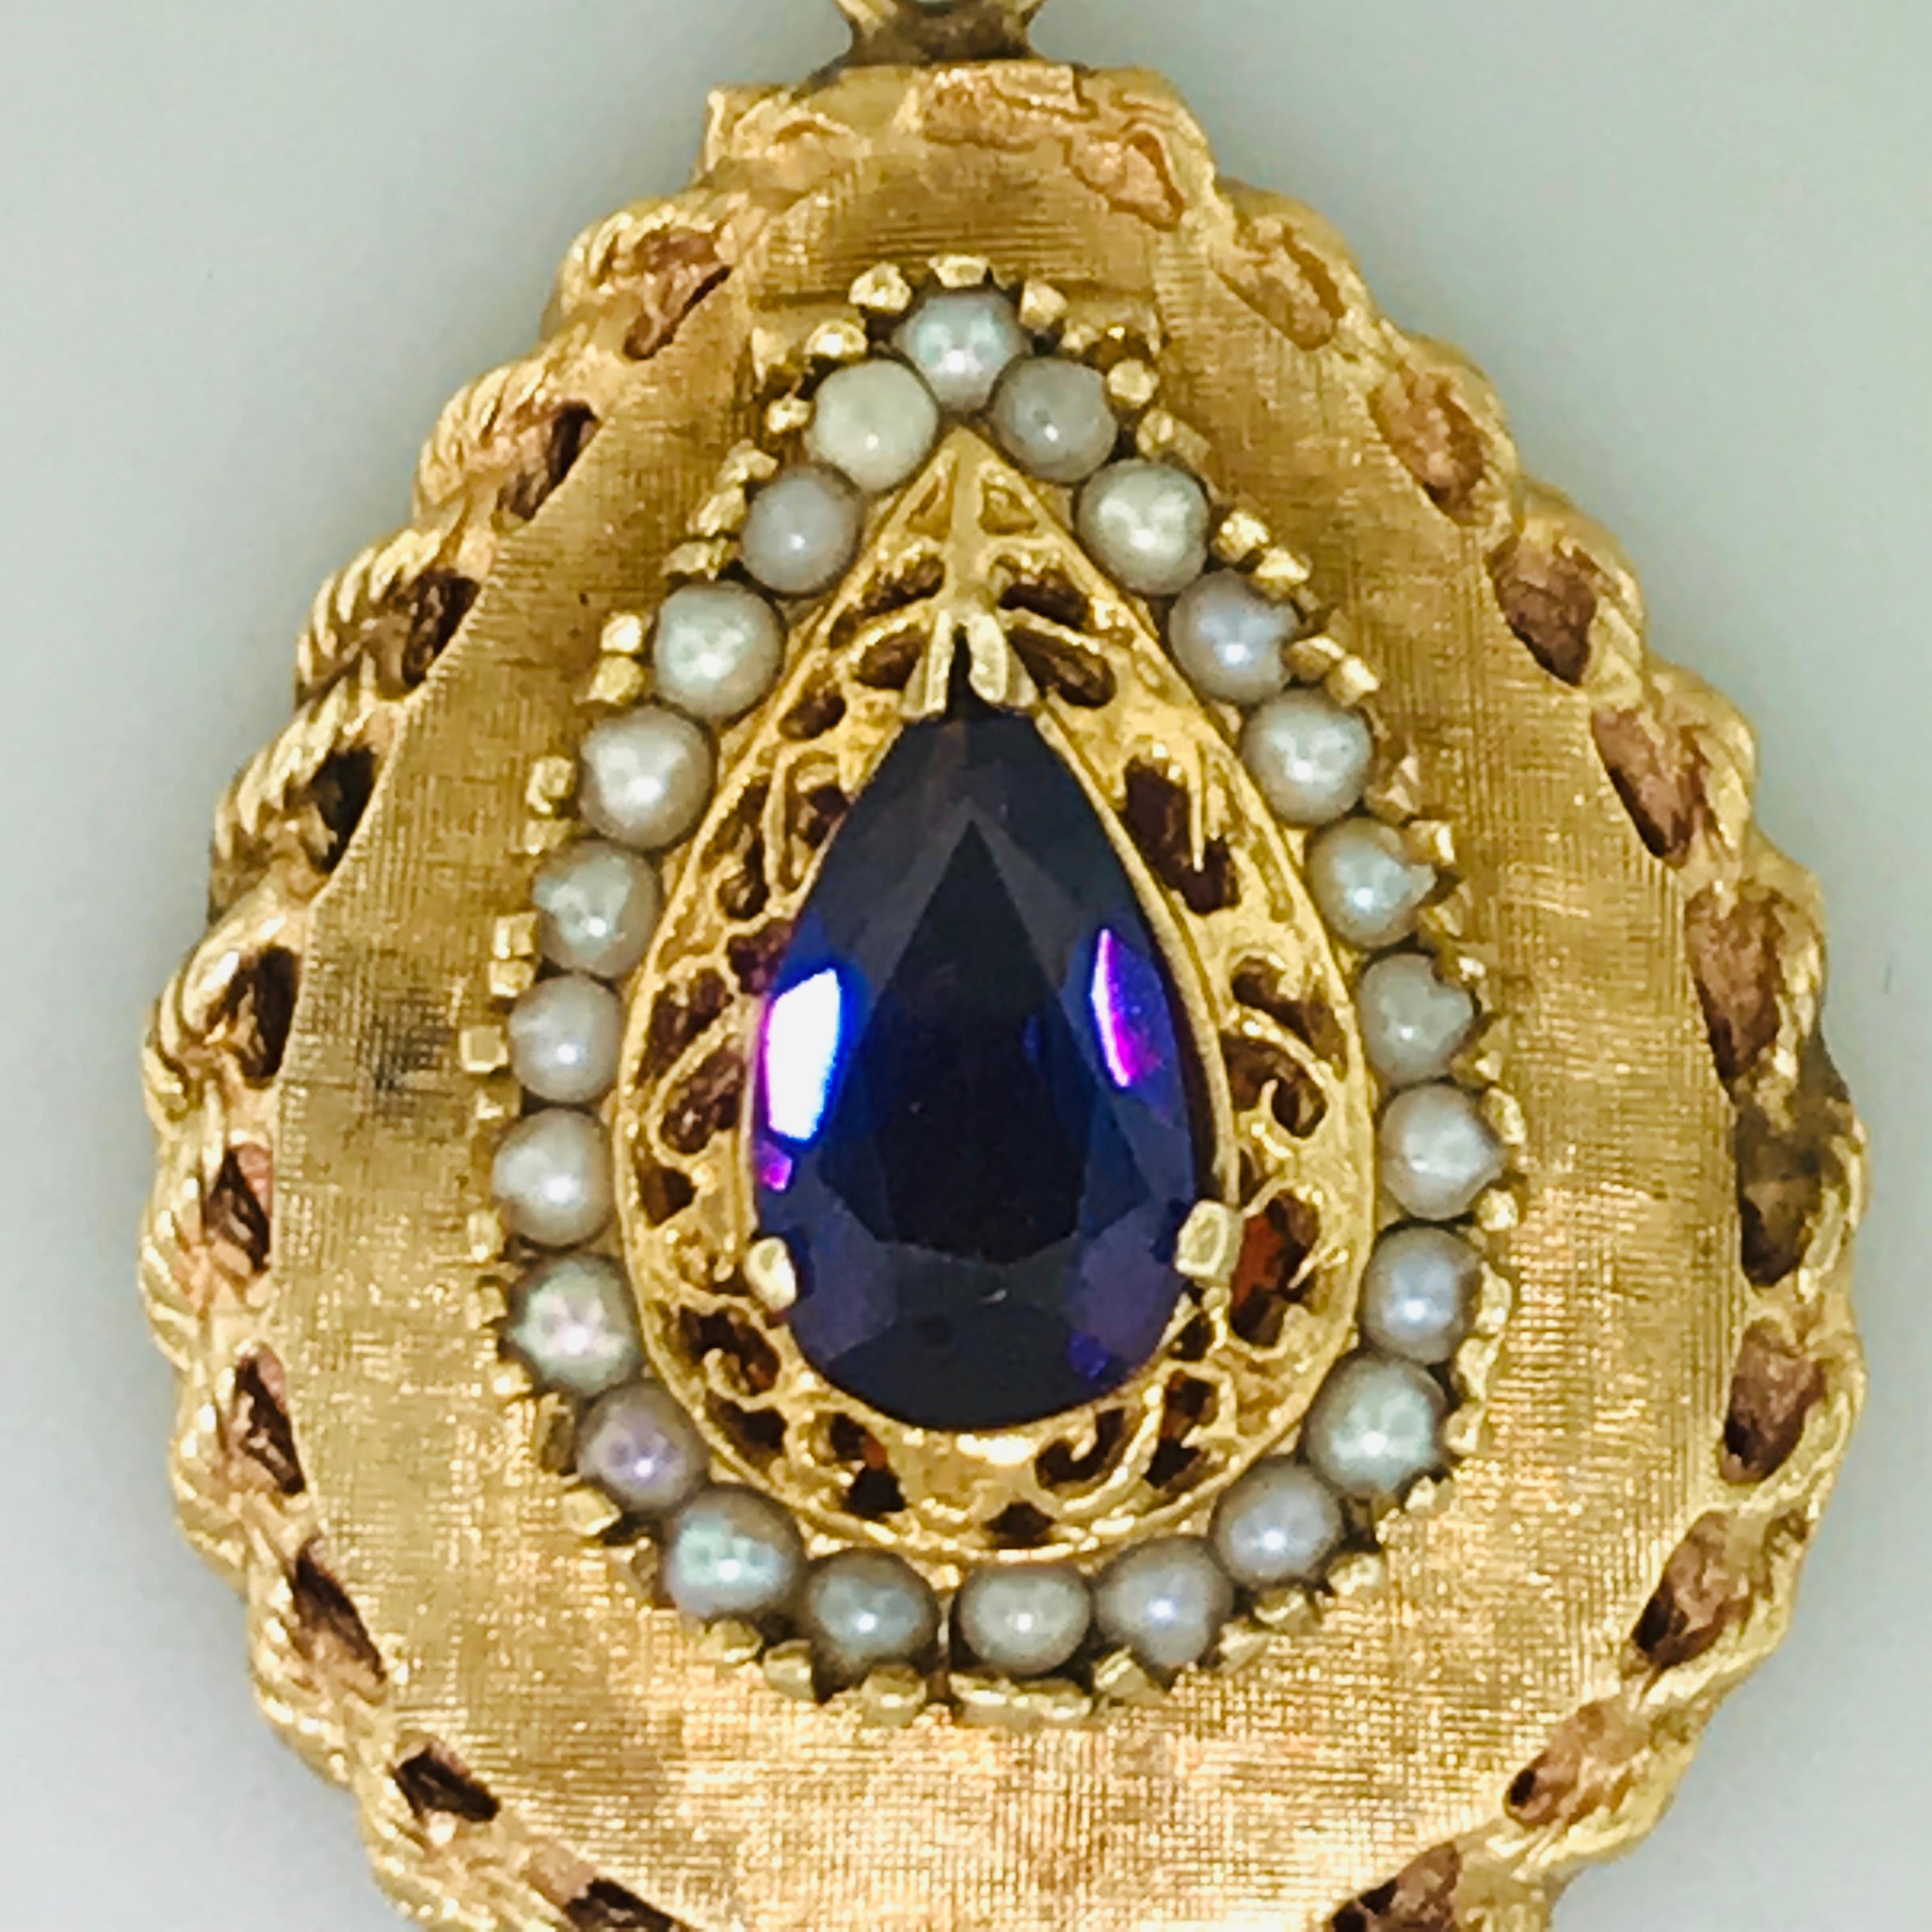 Stunning Amethyst & Pearl Estate Locket-opens from top

This extra-large (XL) locket is unlike any other! With a bright, vibrant purple amethyst in a pear shape, this is an eye-catching estate collection piece. The amethyst is a 12 mm x 7 mm pear